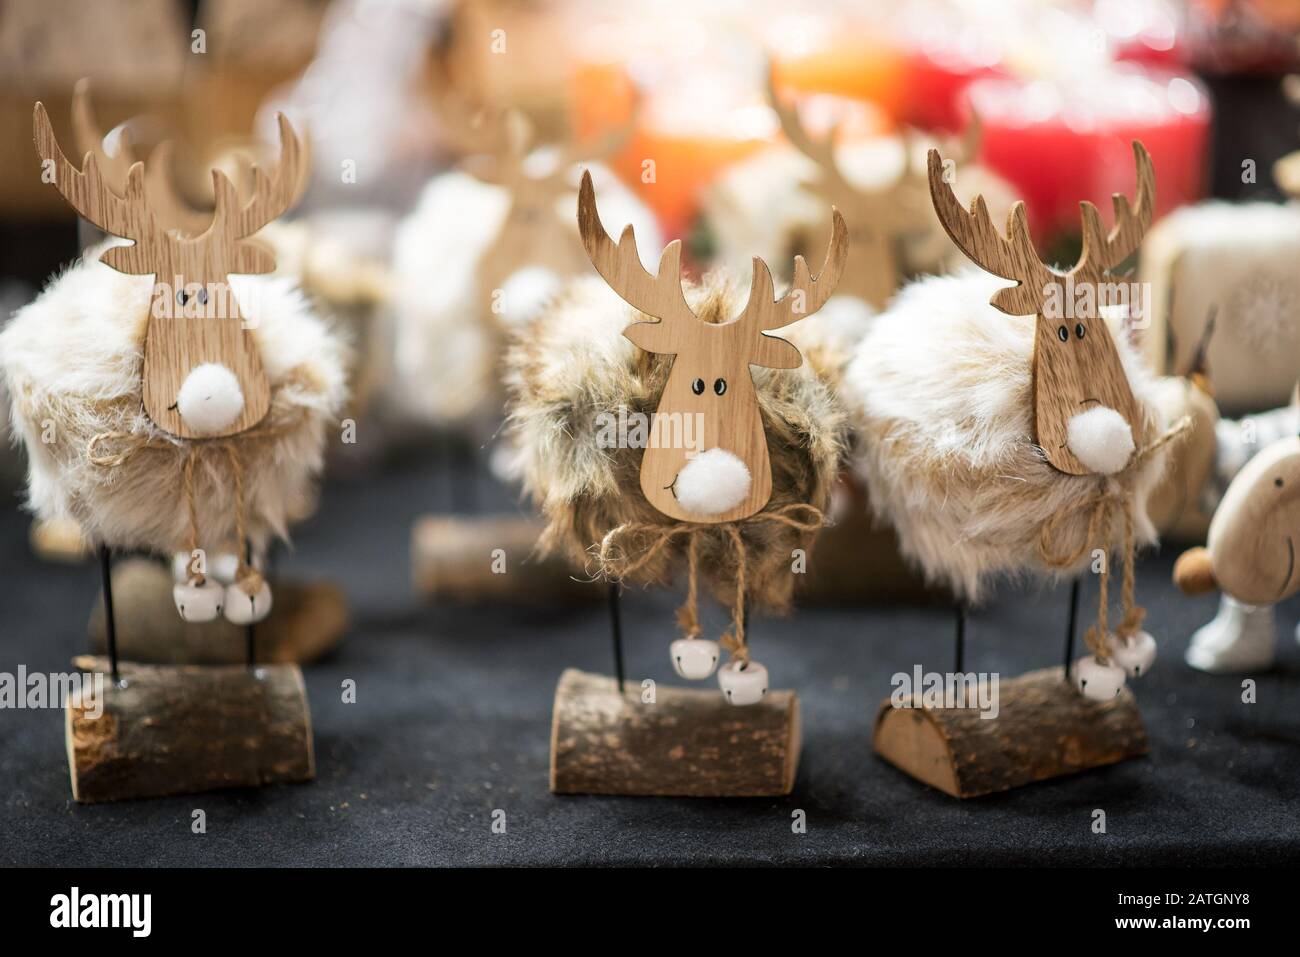 Handcrafted rustic wooden Christmas reindeer souvenirs and candles behind to celebrate the holiday season Stock Photo